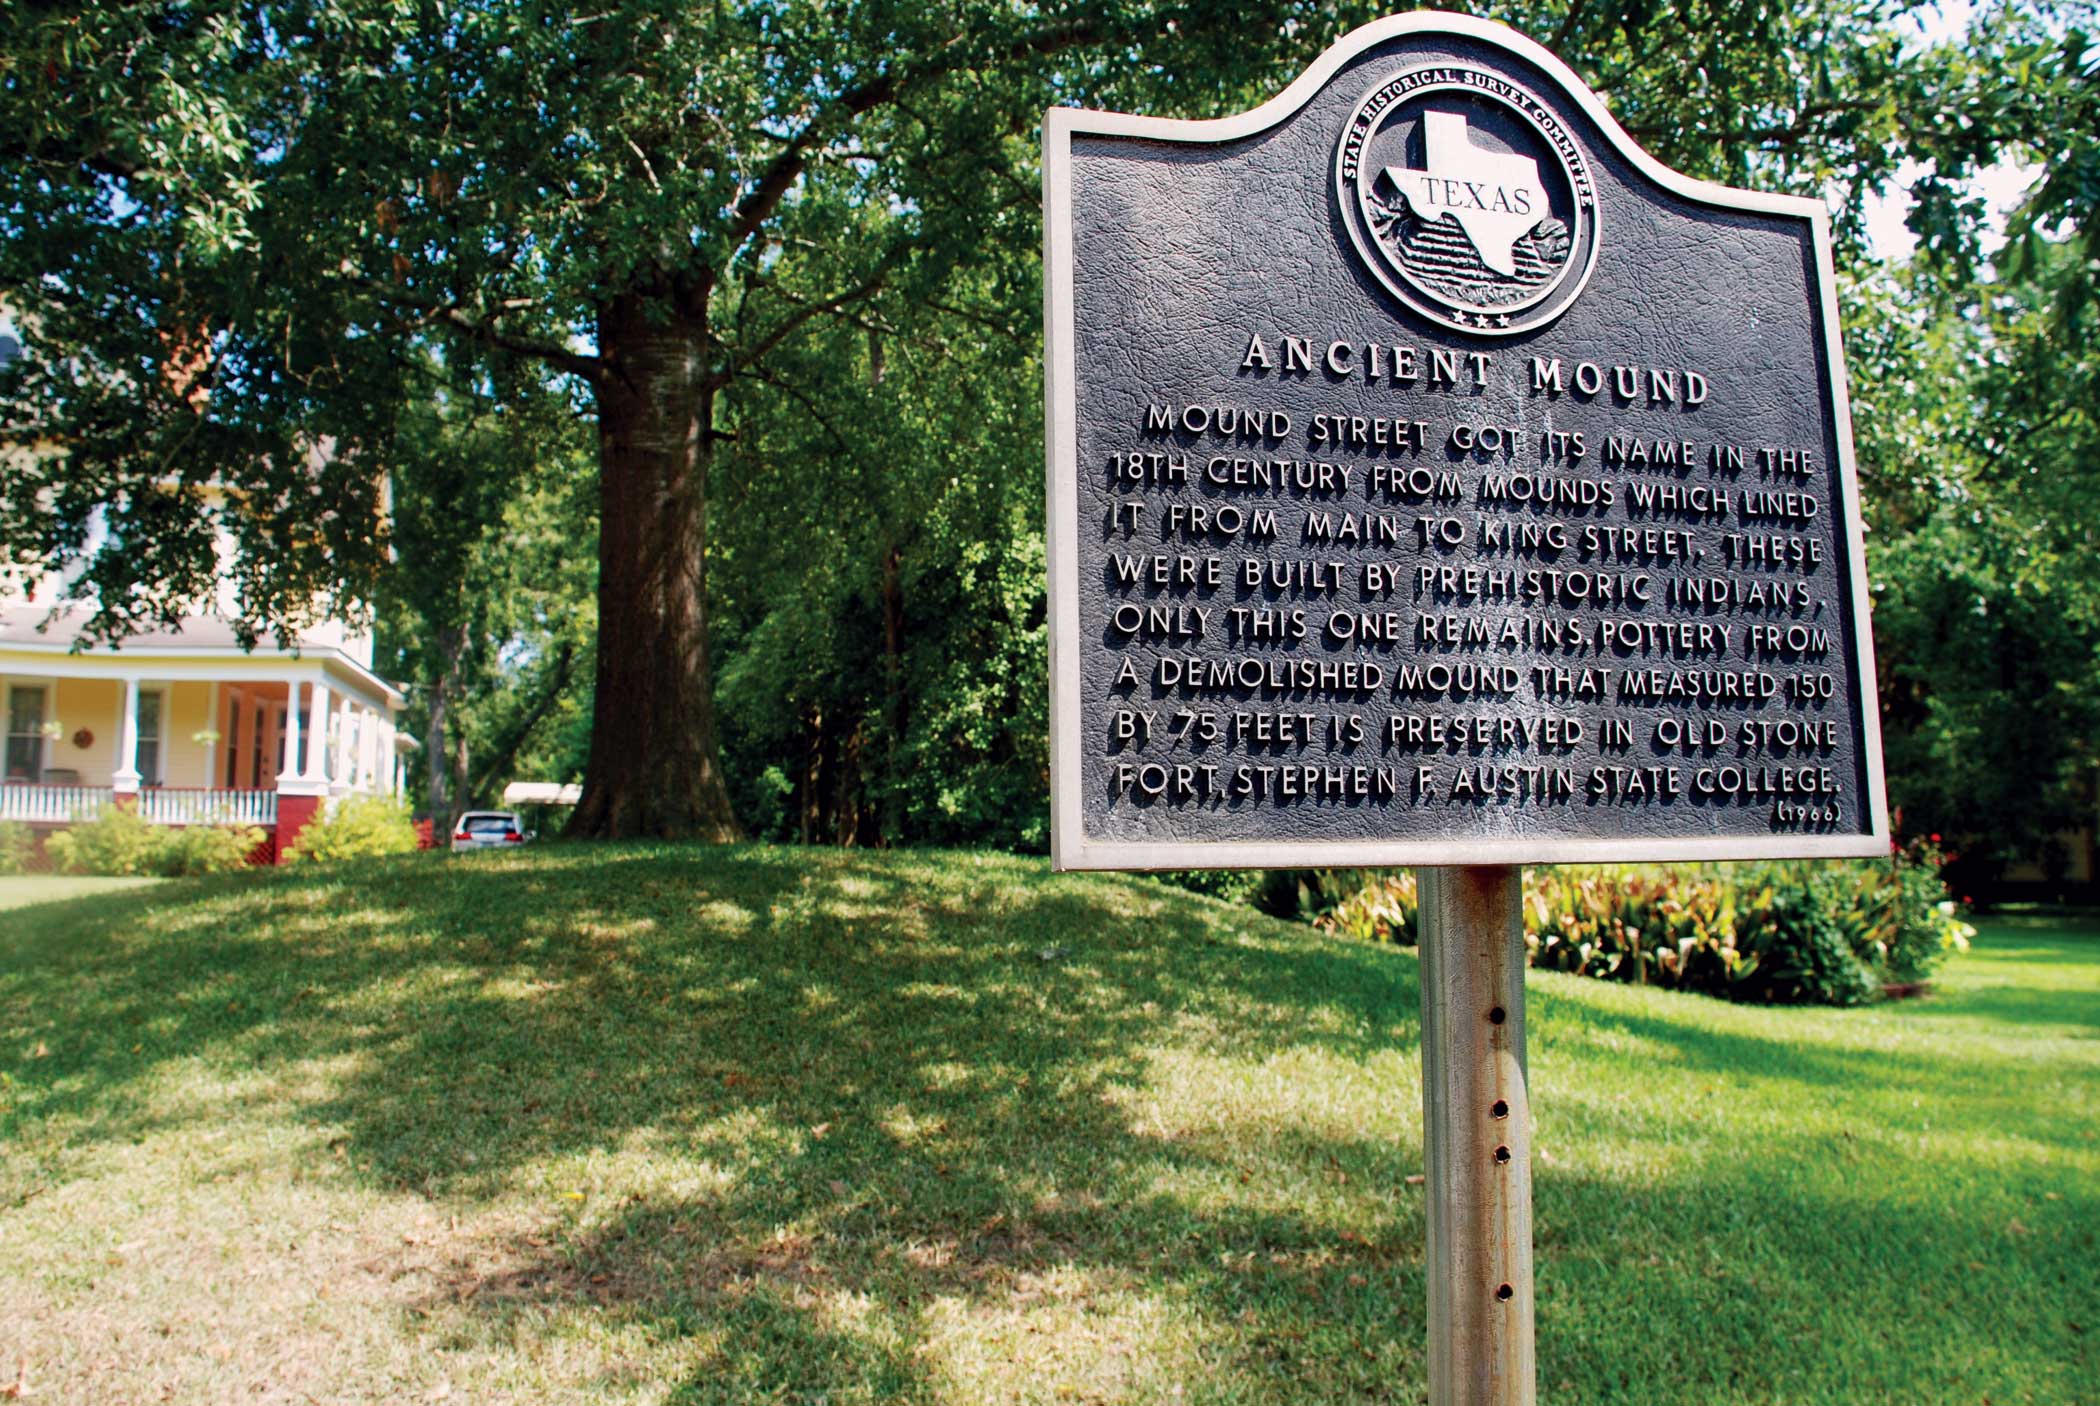 Visitors to Nacogdoches will find historic markers throughout town, including signs on Mound Street memorializing an ancient Native American structure.